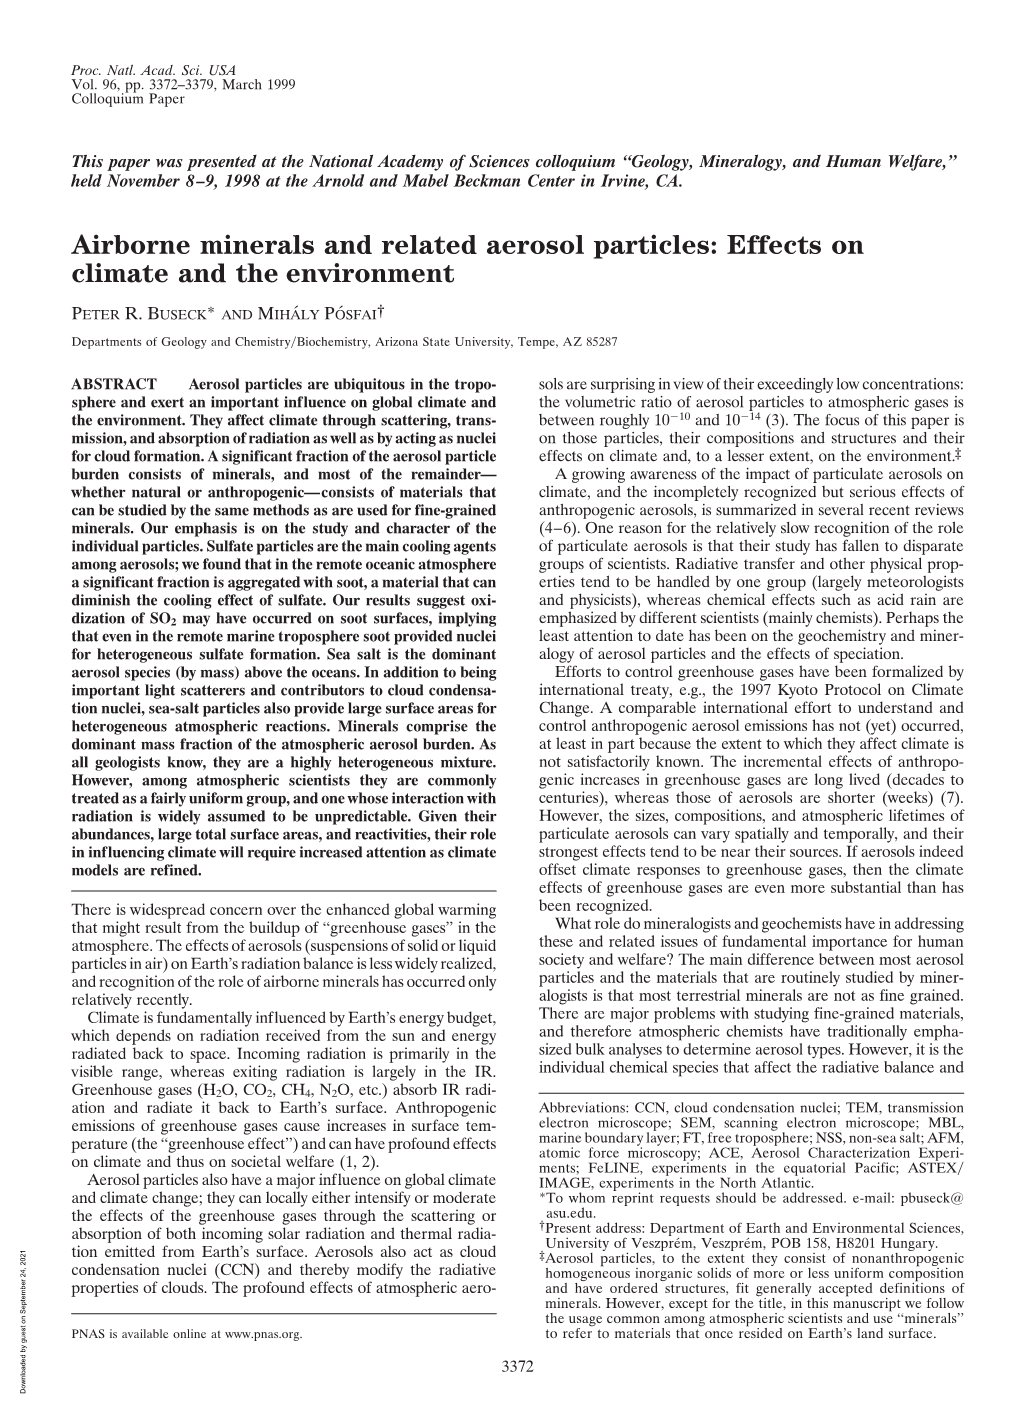 Airborne Minerals and Related Aerosol Particles: Effects on Climate and the Environment